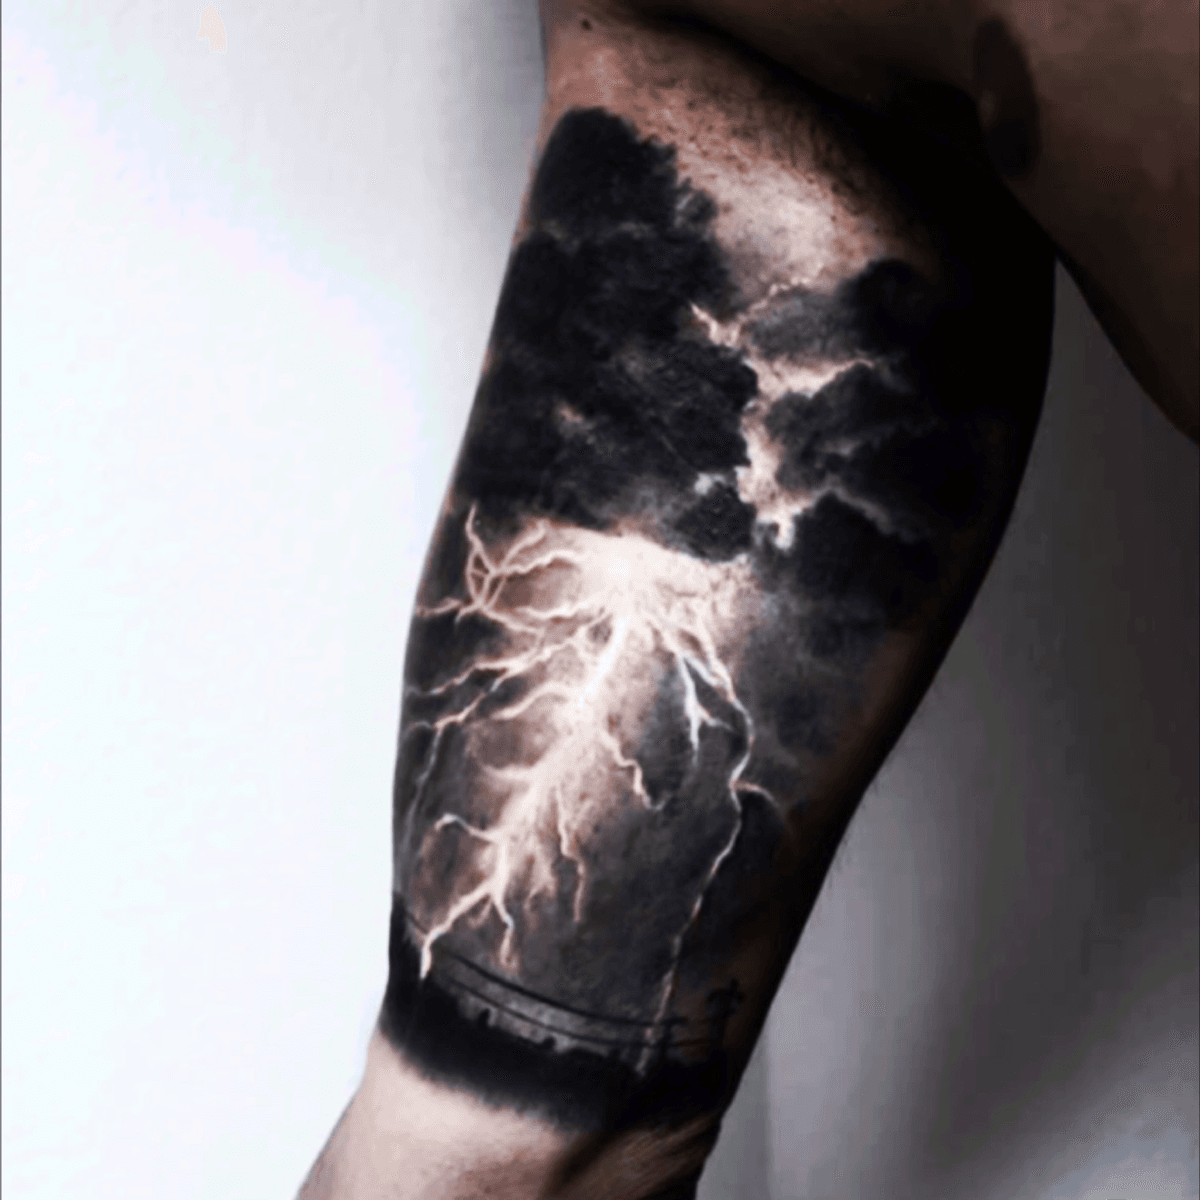 Tattoo uploaded by Melyssa • This #storm is incredible! I'd love a  #hyperrealistic #weather #tattoo! #lightning #clouds #dreamtattoo • Tattoodo